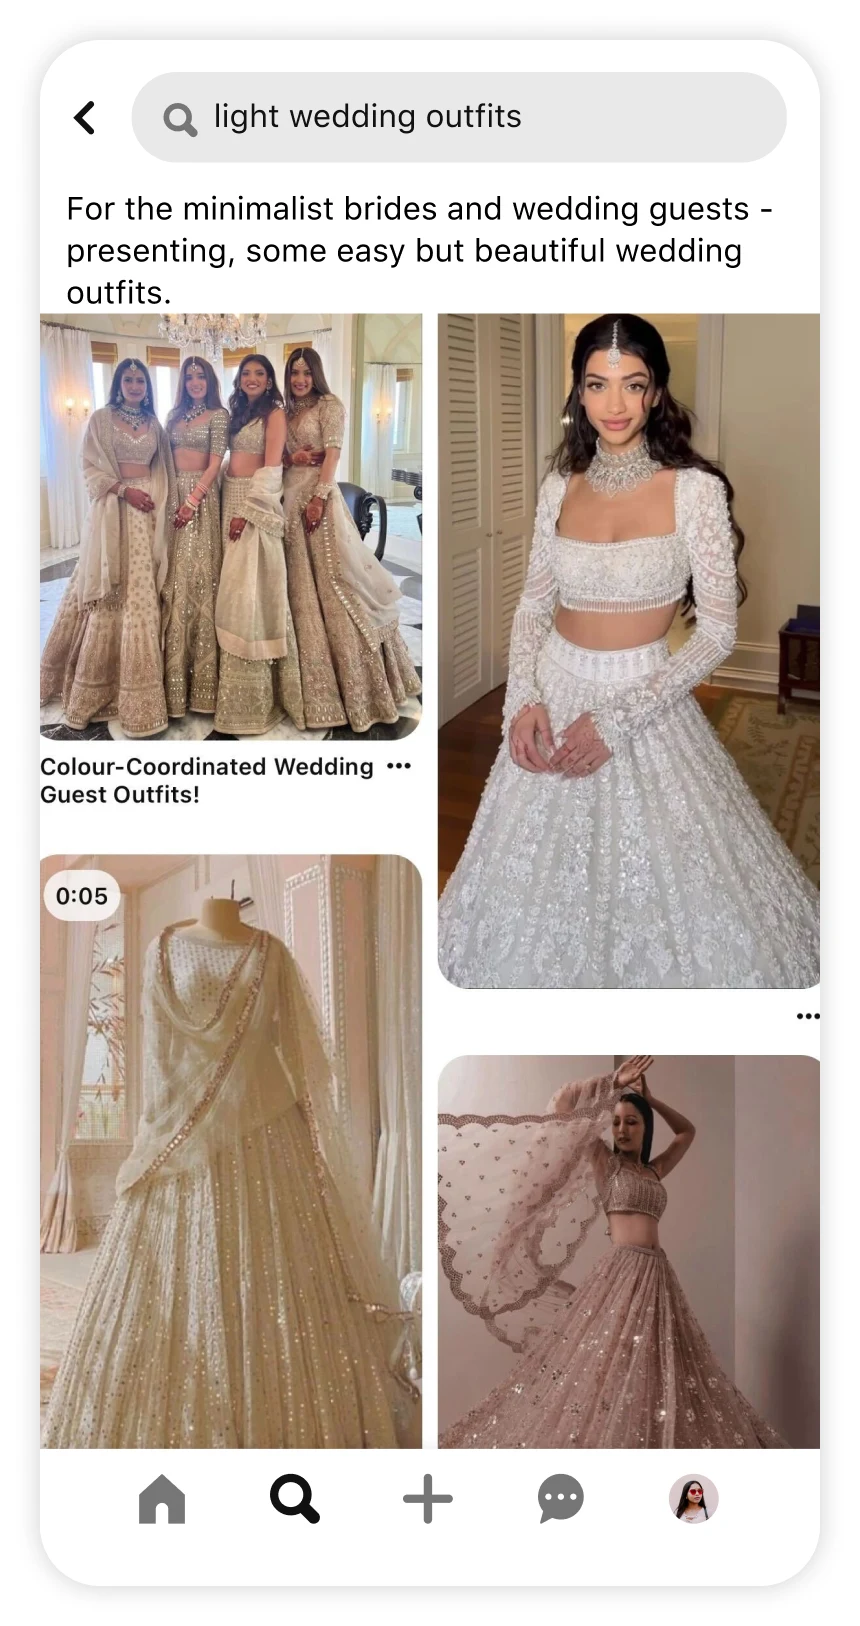 Screen shot of Pinterest app showing trend article for light wedding outfits